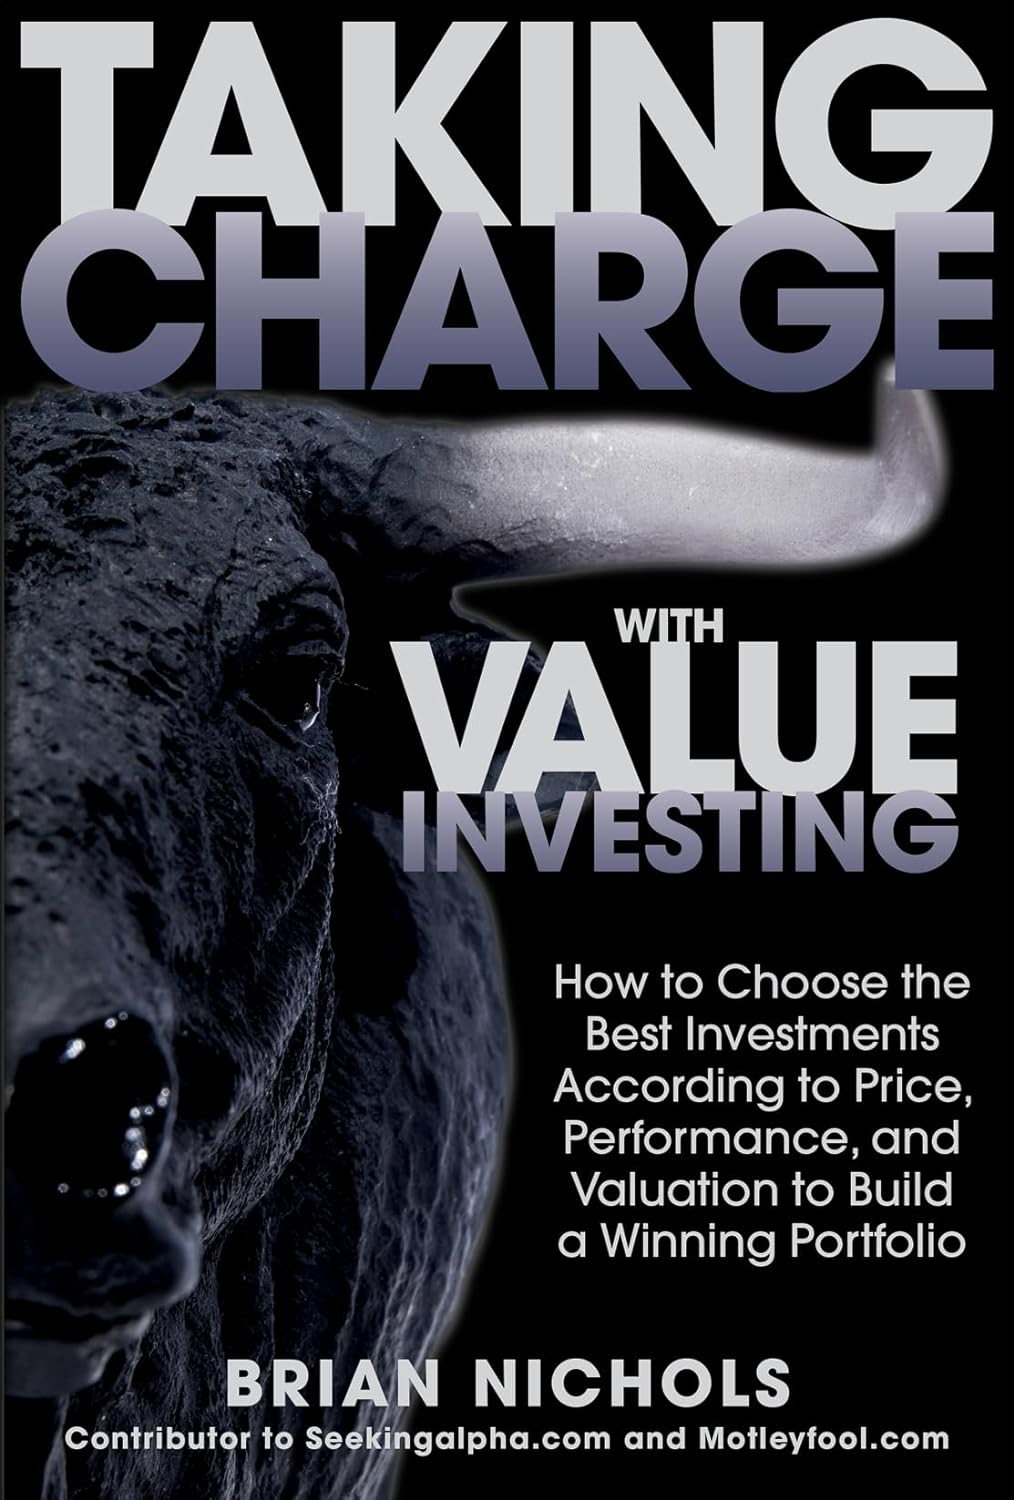 Taking Charge with Value Investing: How to Choose the Best Investments According to Price, Performance, & Valuation to Build a Winning Portfolio